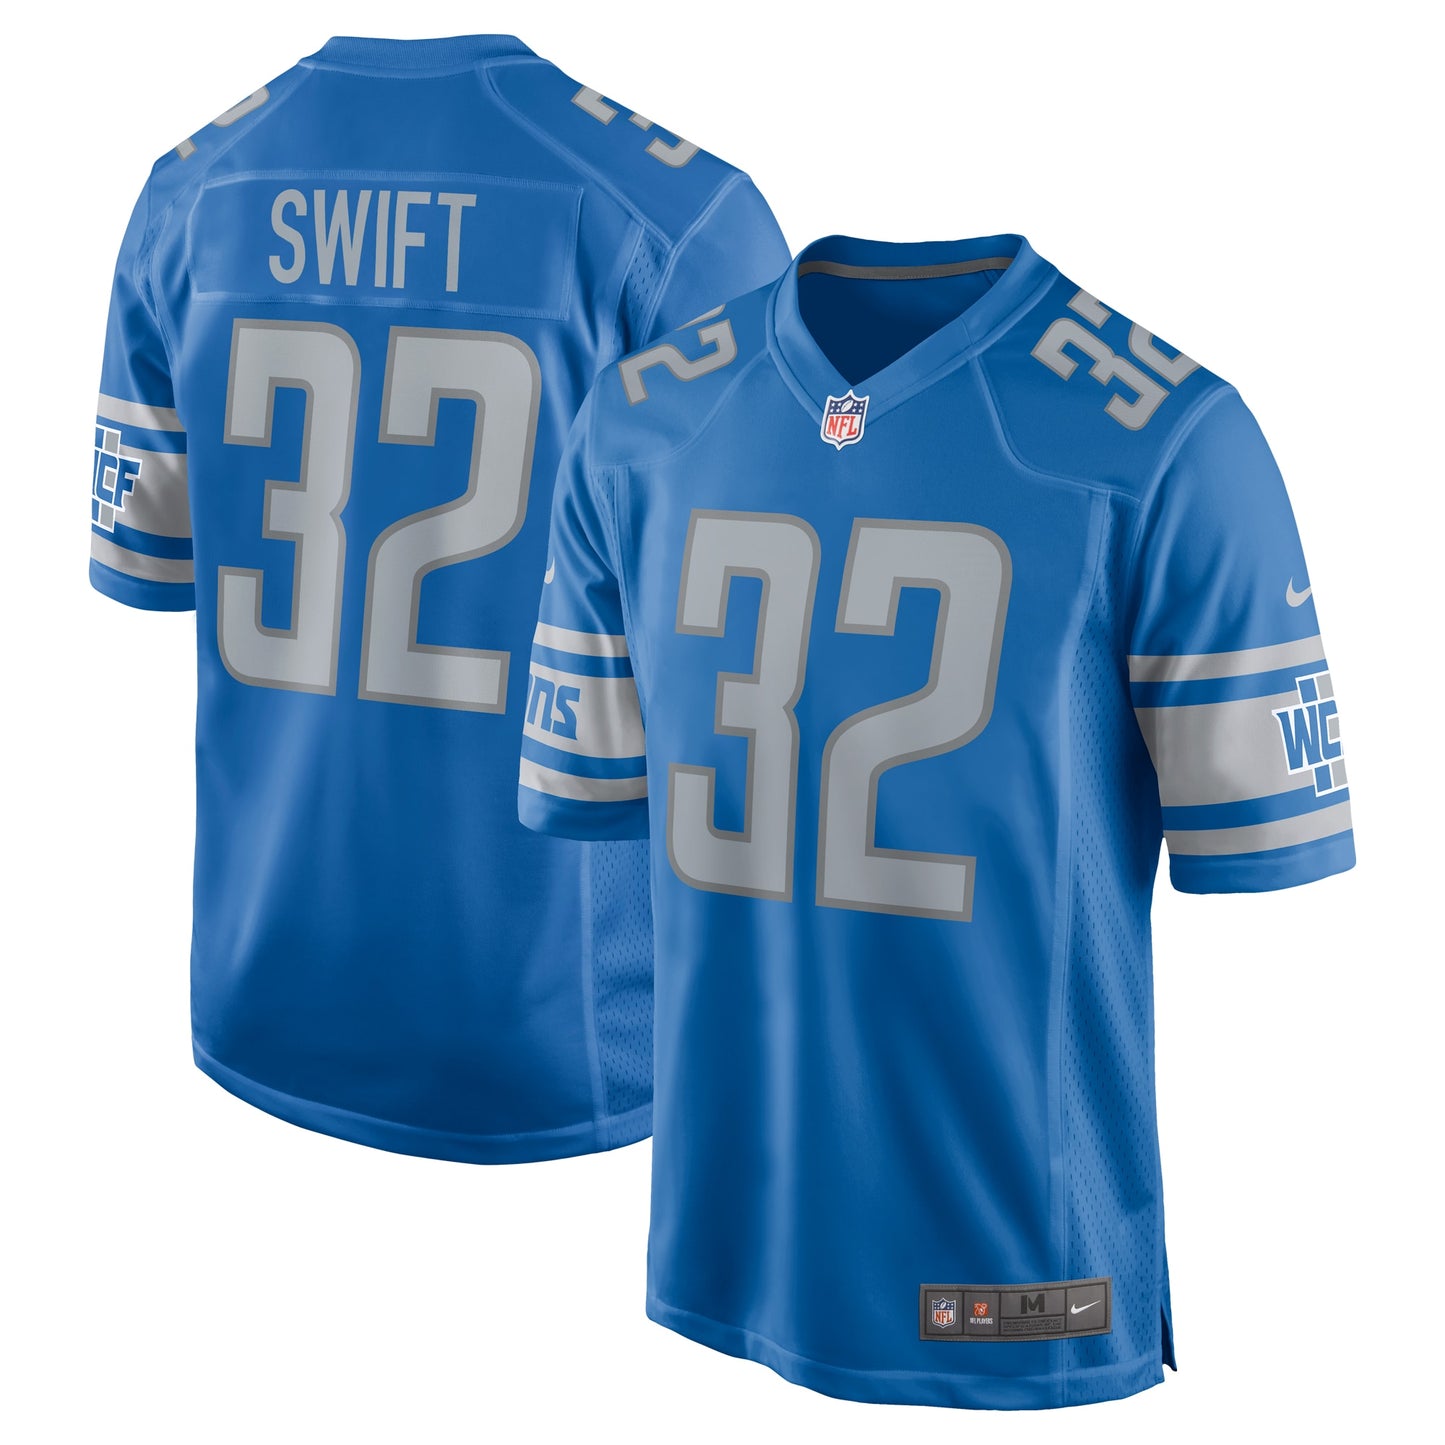 D'Andre Swift Detroit Lions Nike Team Game Jersey - Blue